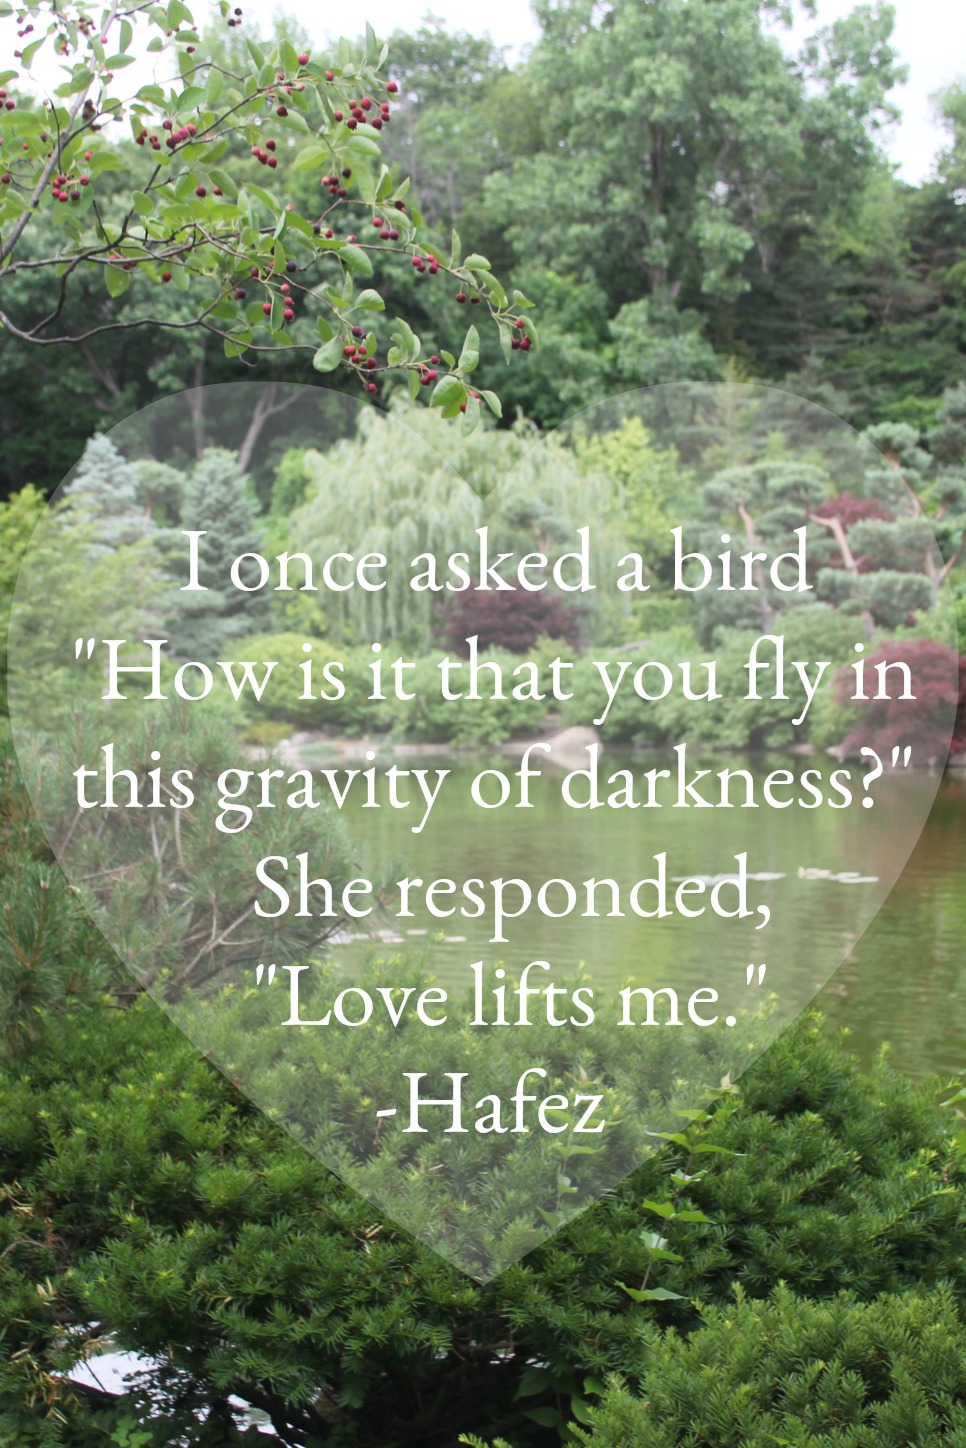 Hafez quote. I once asked a bird How is is that you fly in this gravity of darkness? She responded Love lifts me. #hafez #hellolovelystudio #encouragement #poetry #inspiringquote